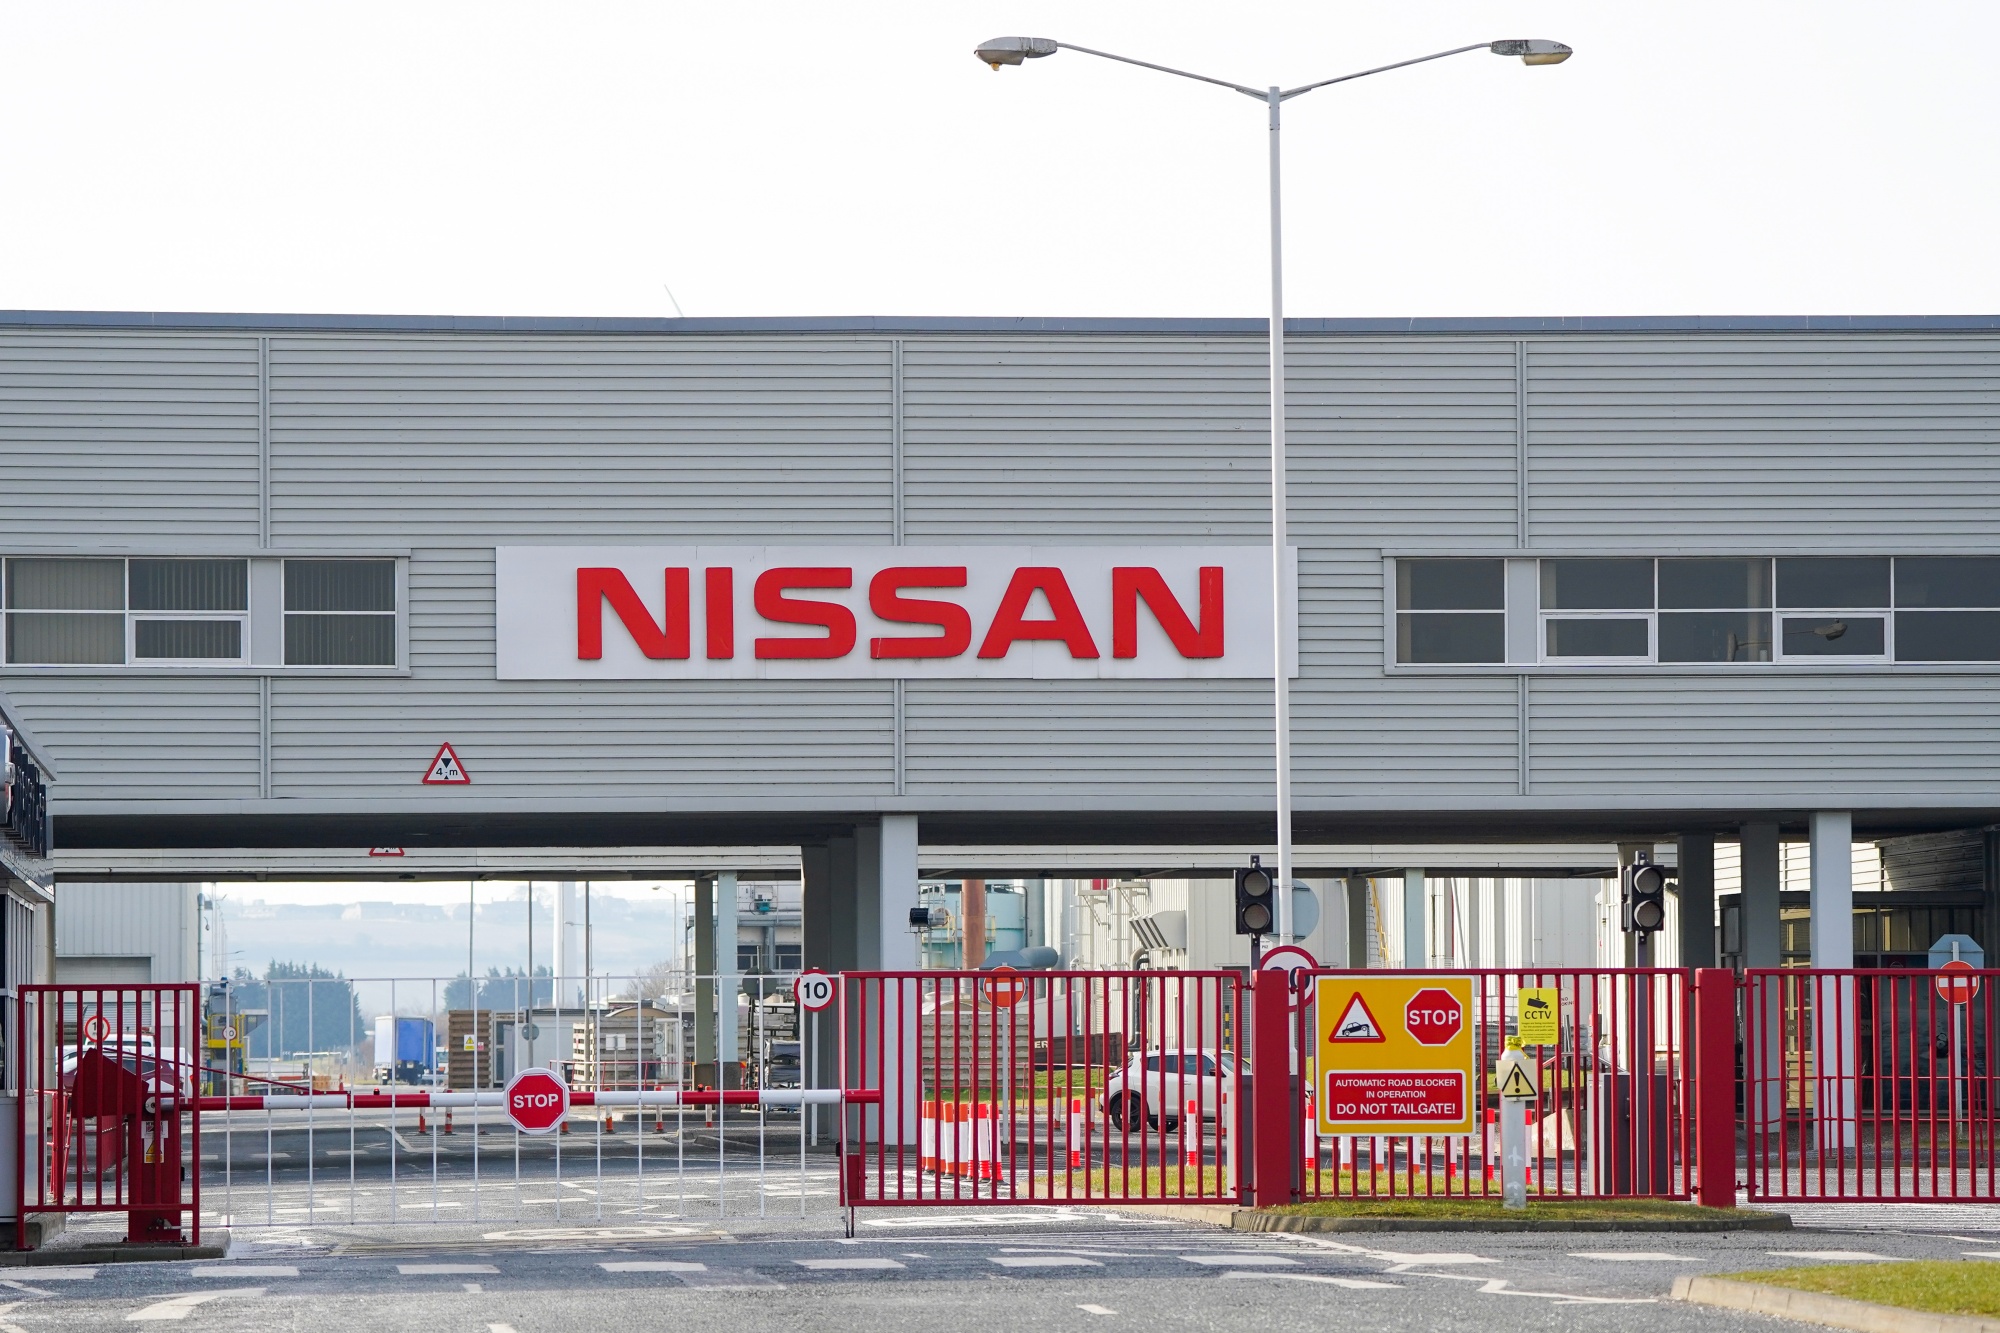 The Nissan factory in Sunderland.